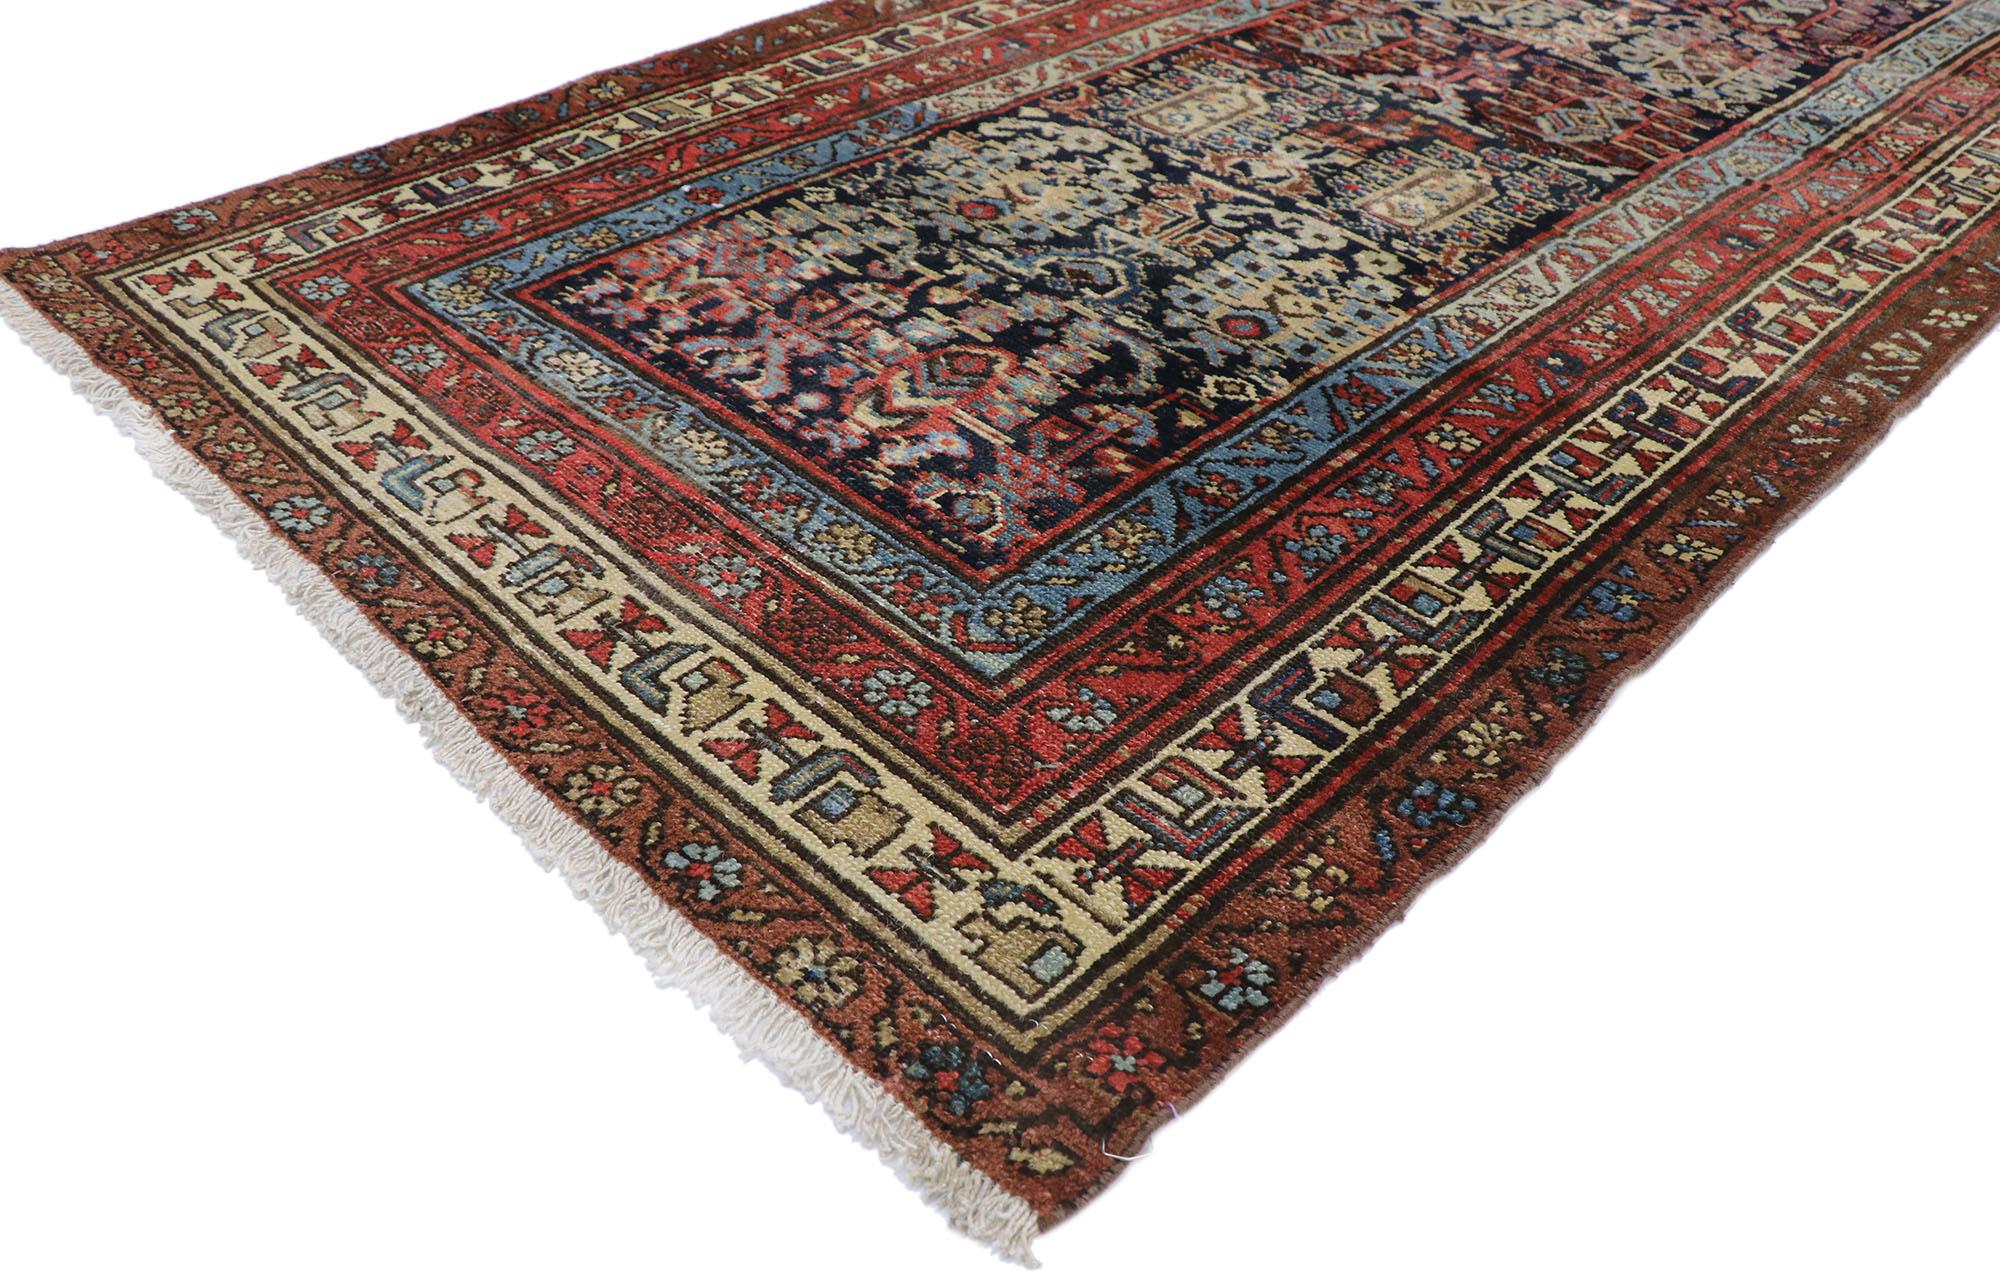 60875 antique Persian Malayer runner with rustic Mid-Century Modern style. With ornate details and rustic sensibility, this hand knotted wool antique Persian Malayer runner will take on a curated lived-in look that feels timeless while imparting a